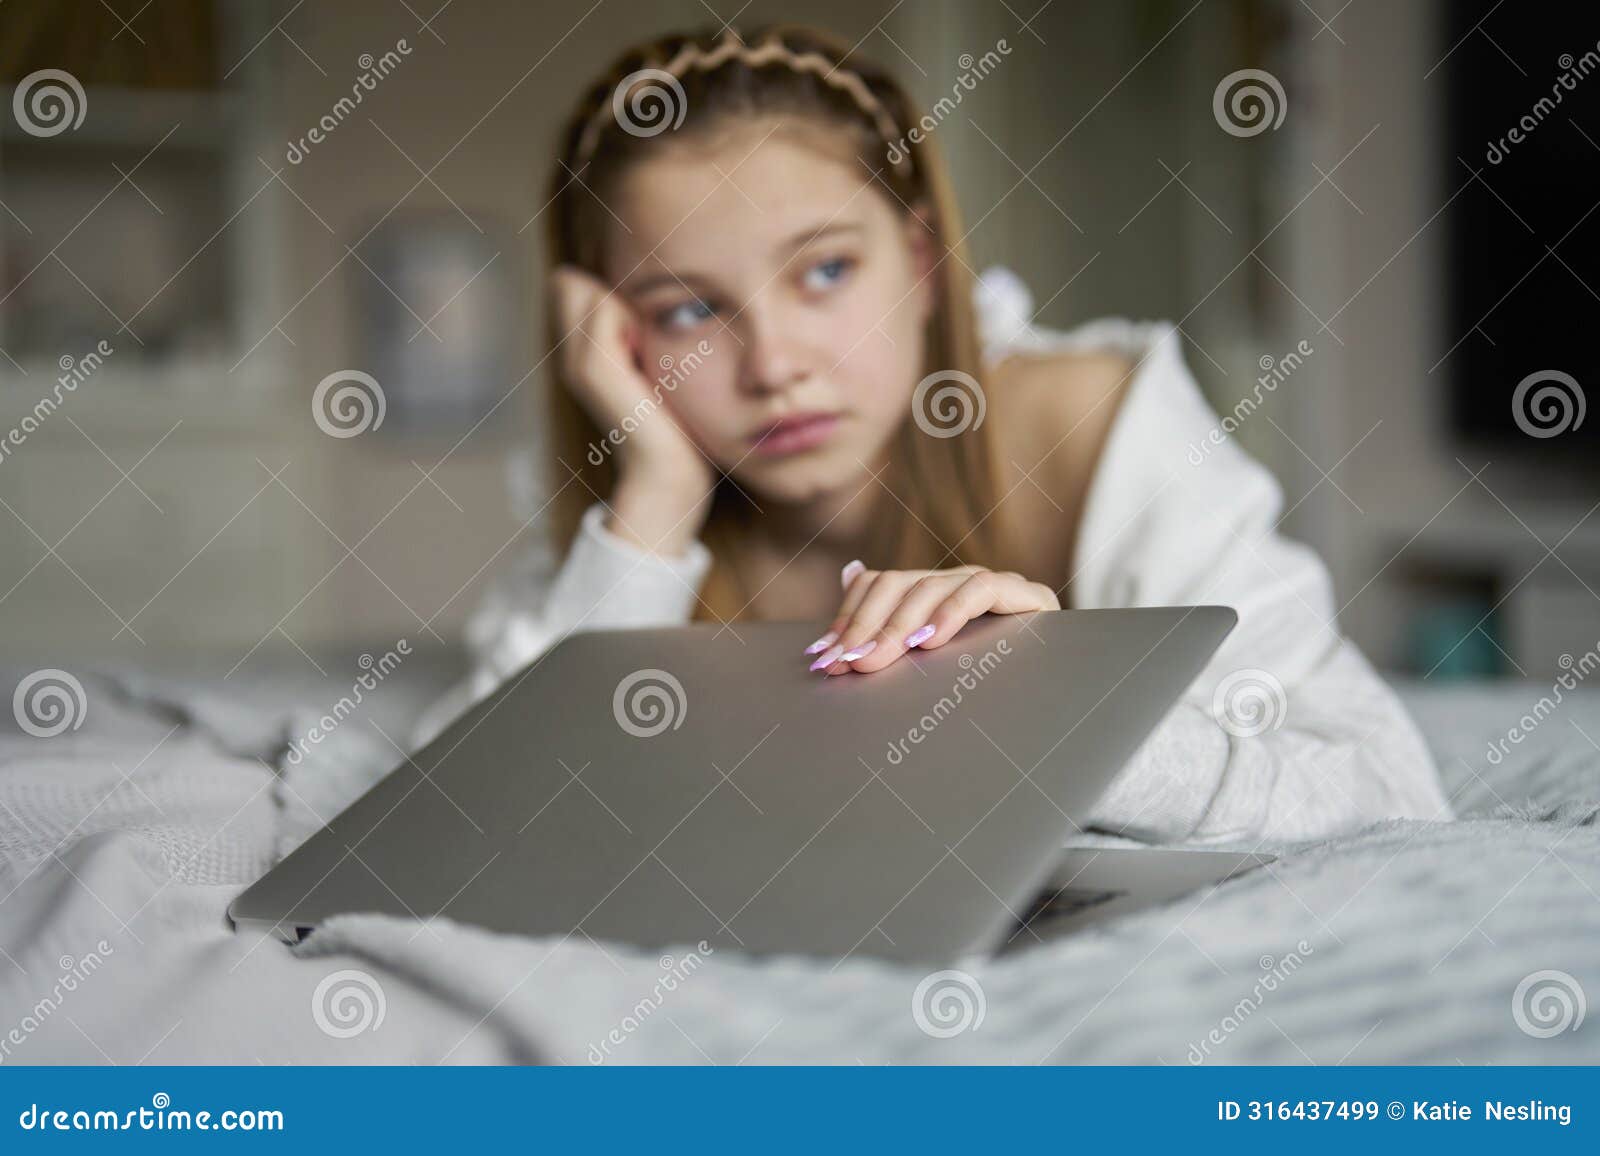 unhappy teenage girl closing laptop lying on bed at home anxious about social media online bullying